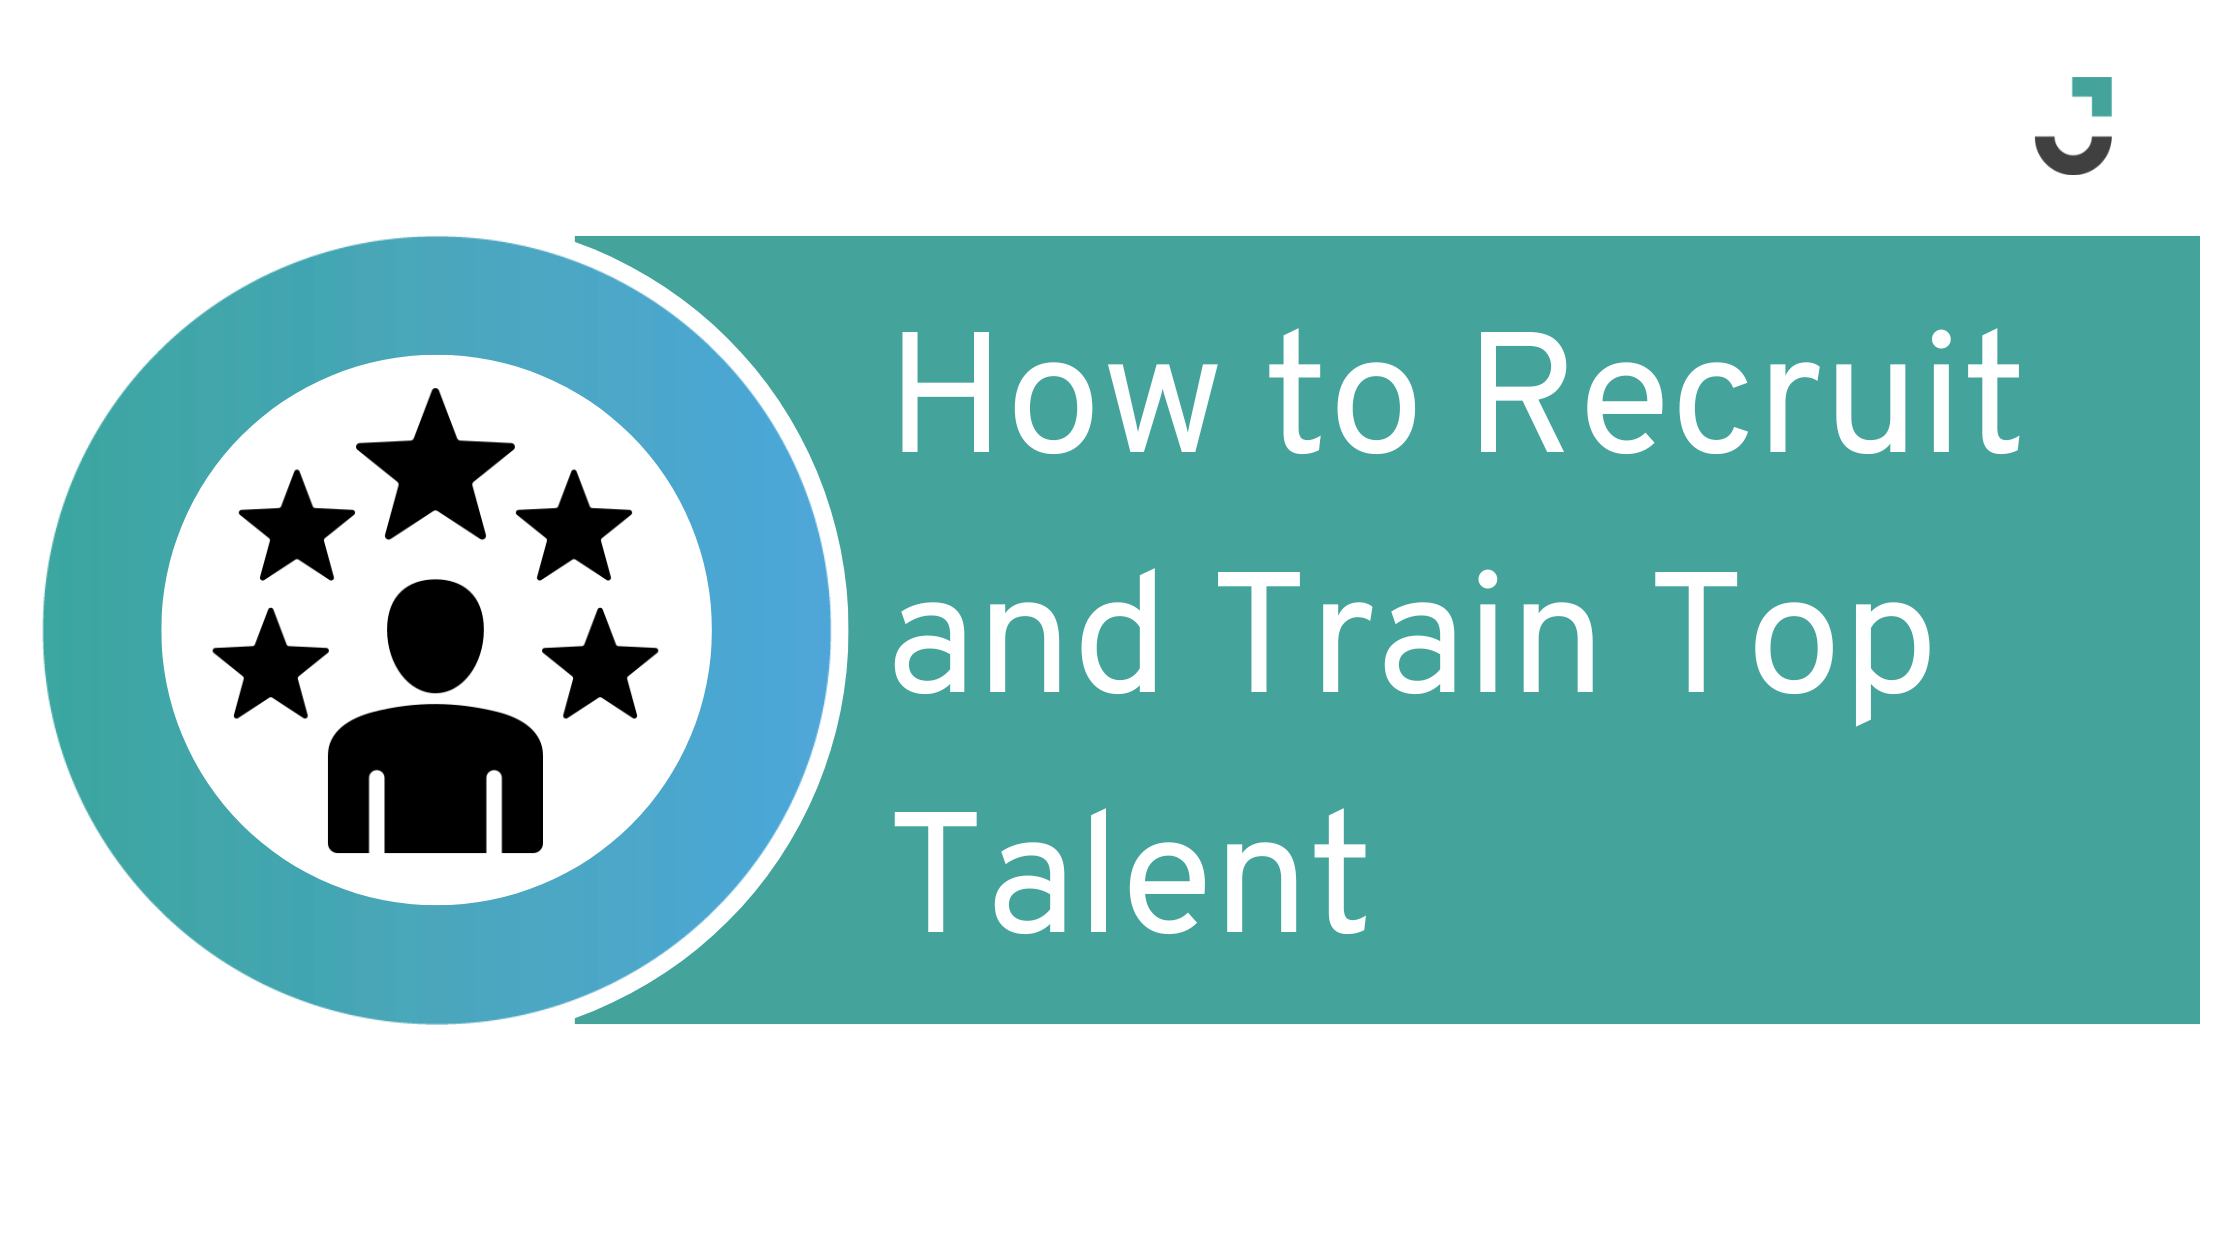 How to Recruit and Train Top Talent